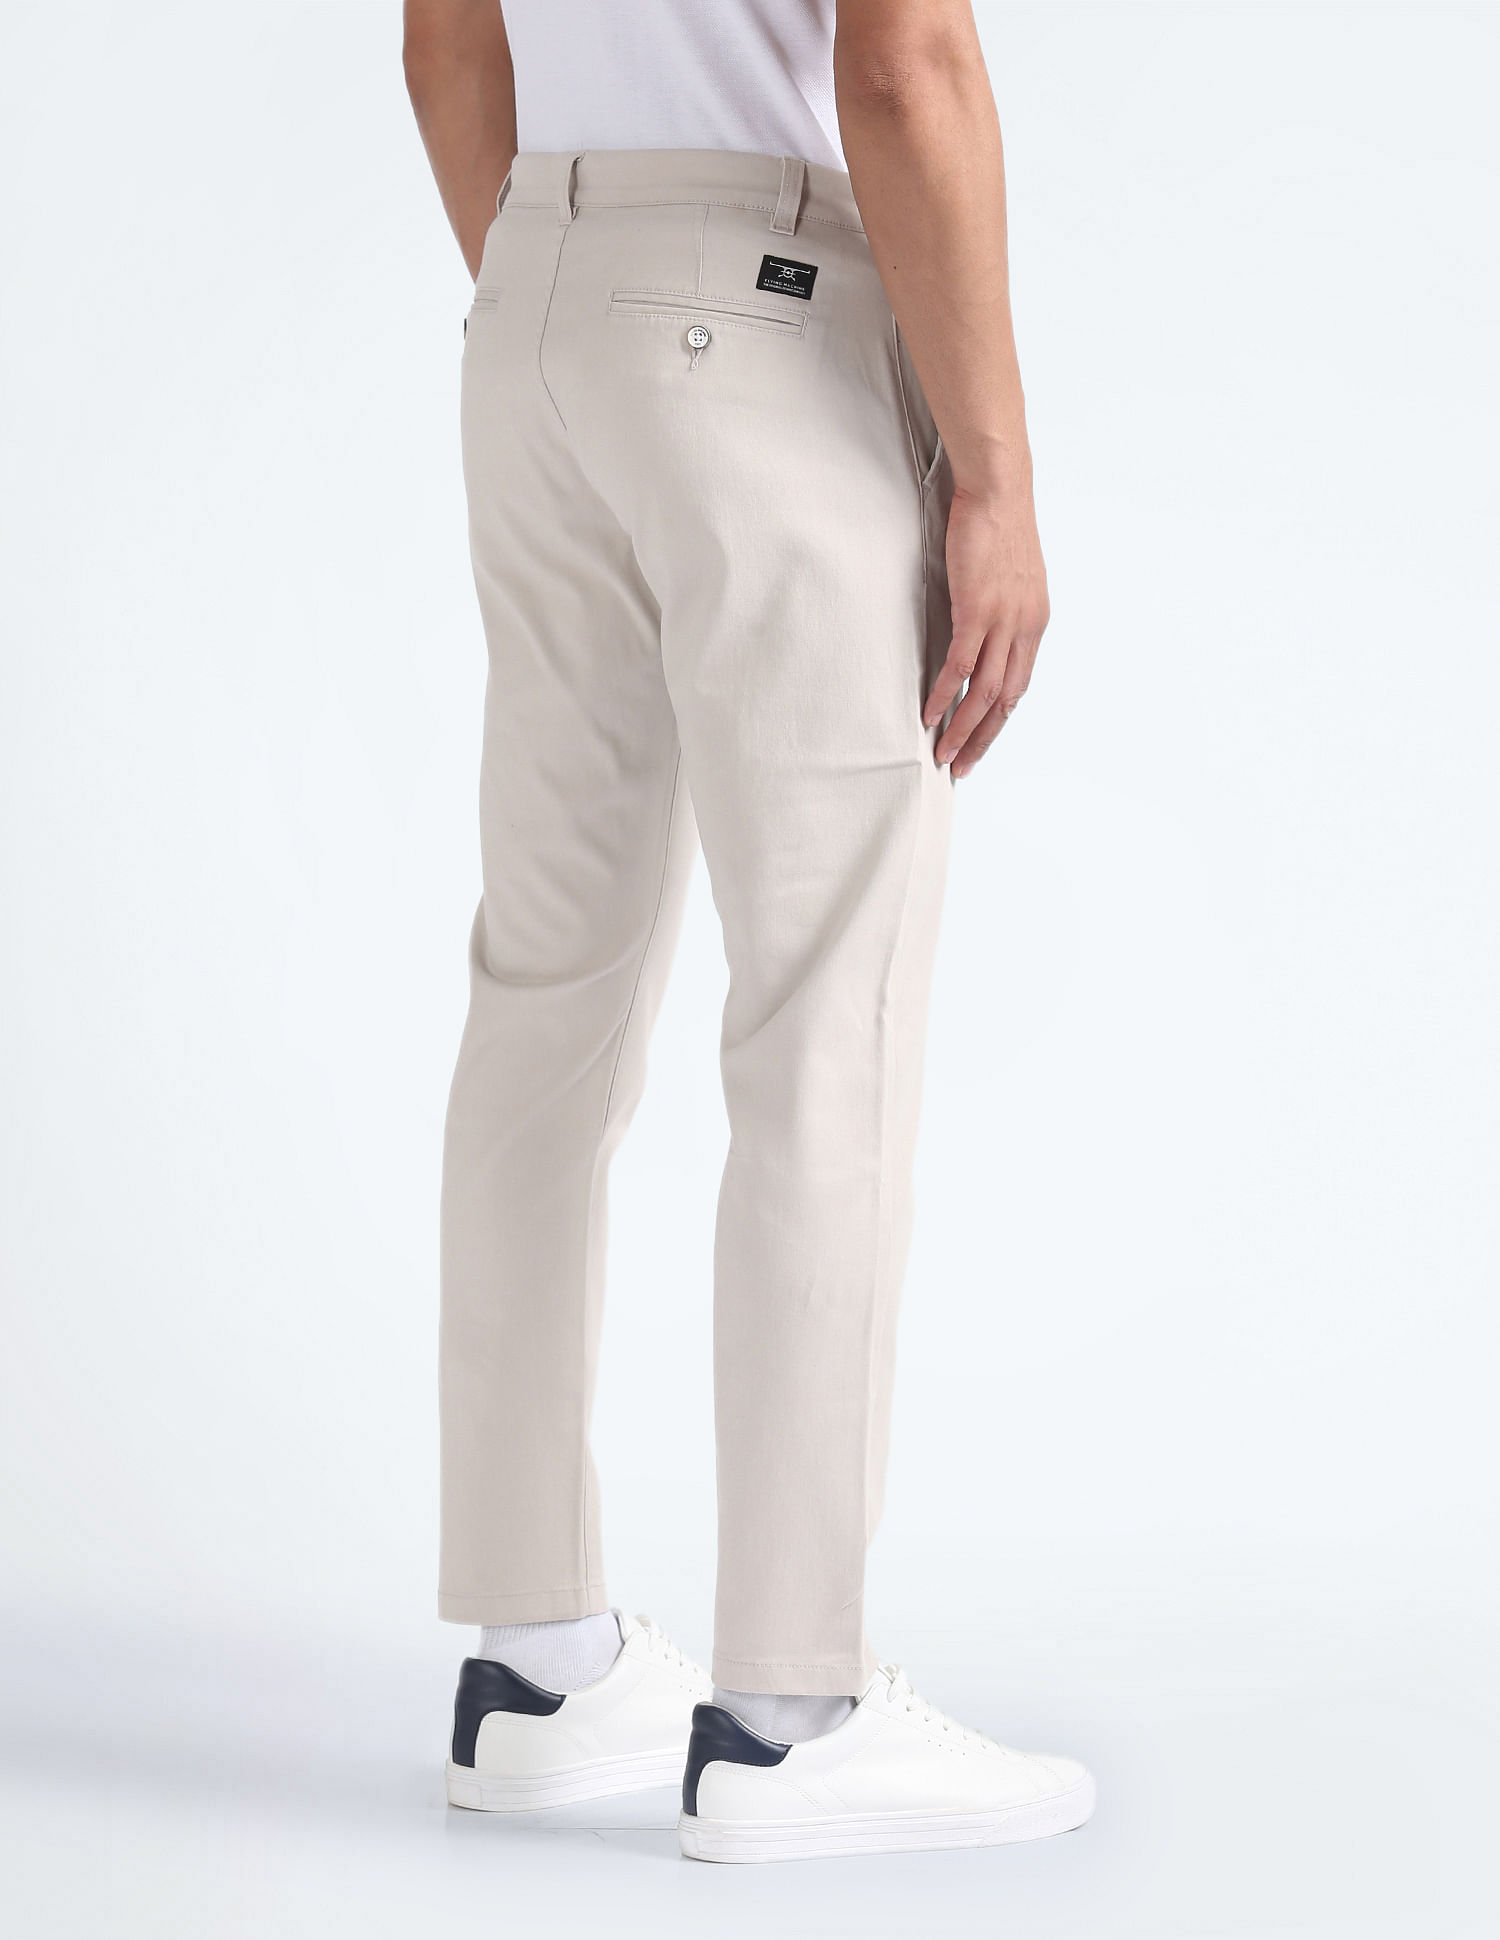 Slim Fit Twill Cargo Trousers